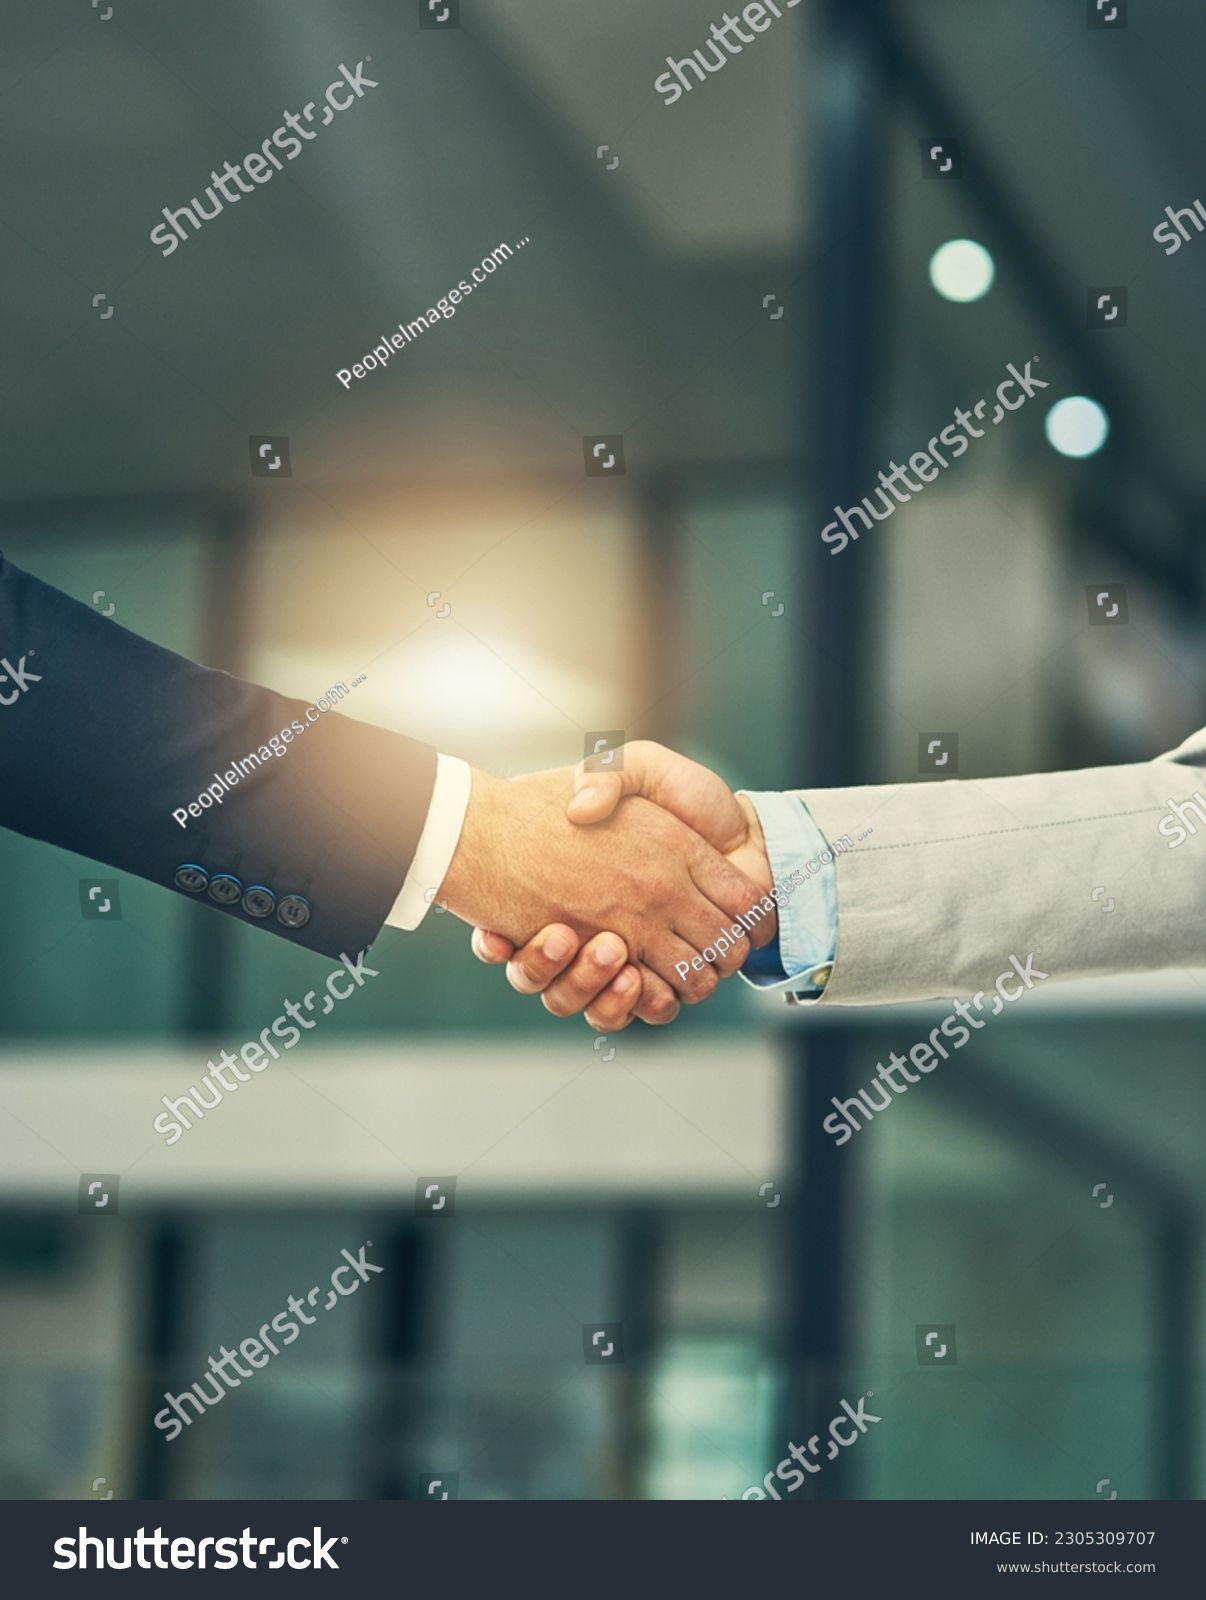 Partnership, handshake and hands of business people in office for hiring, recruitment deal and thank you. Corporate, collaboration and male workers shaking hands for onboarding, support and teamwork #2305309707